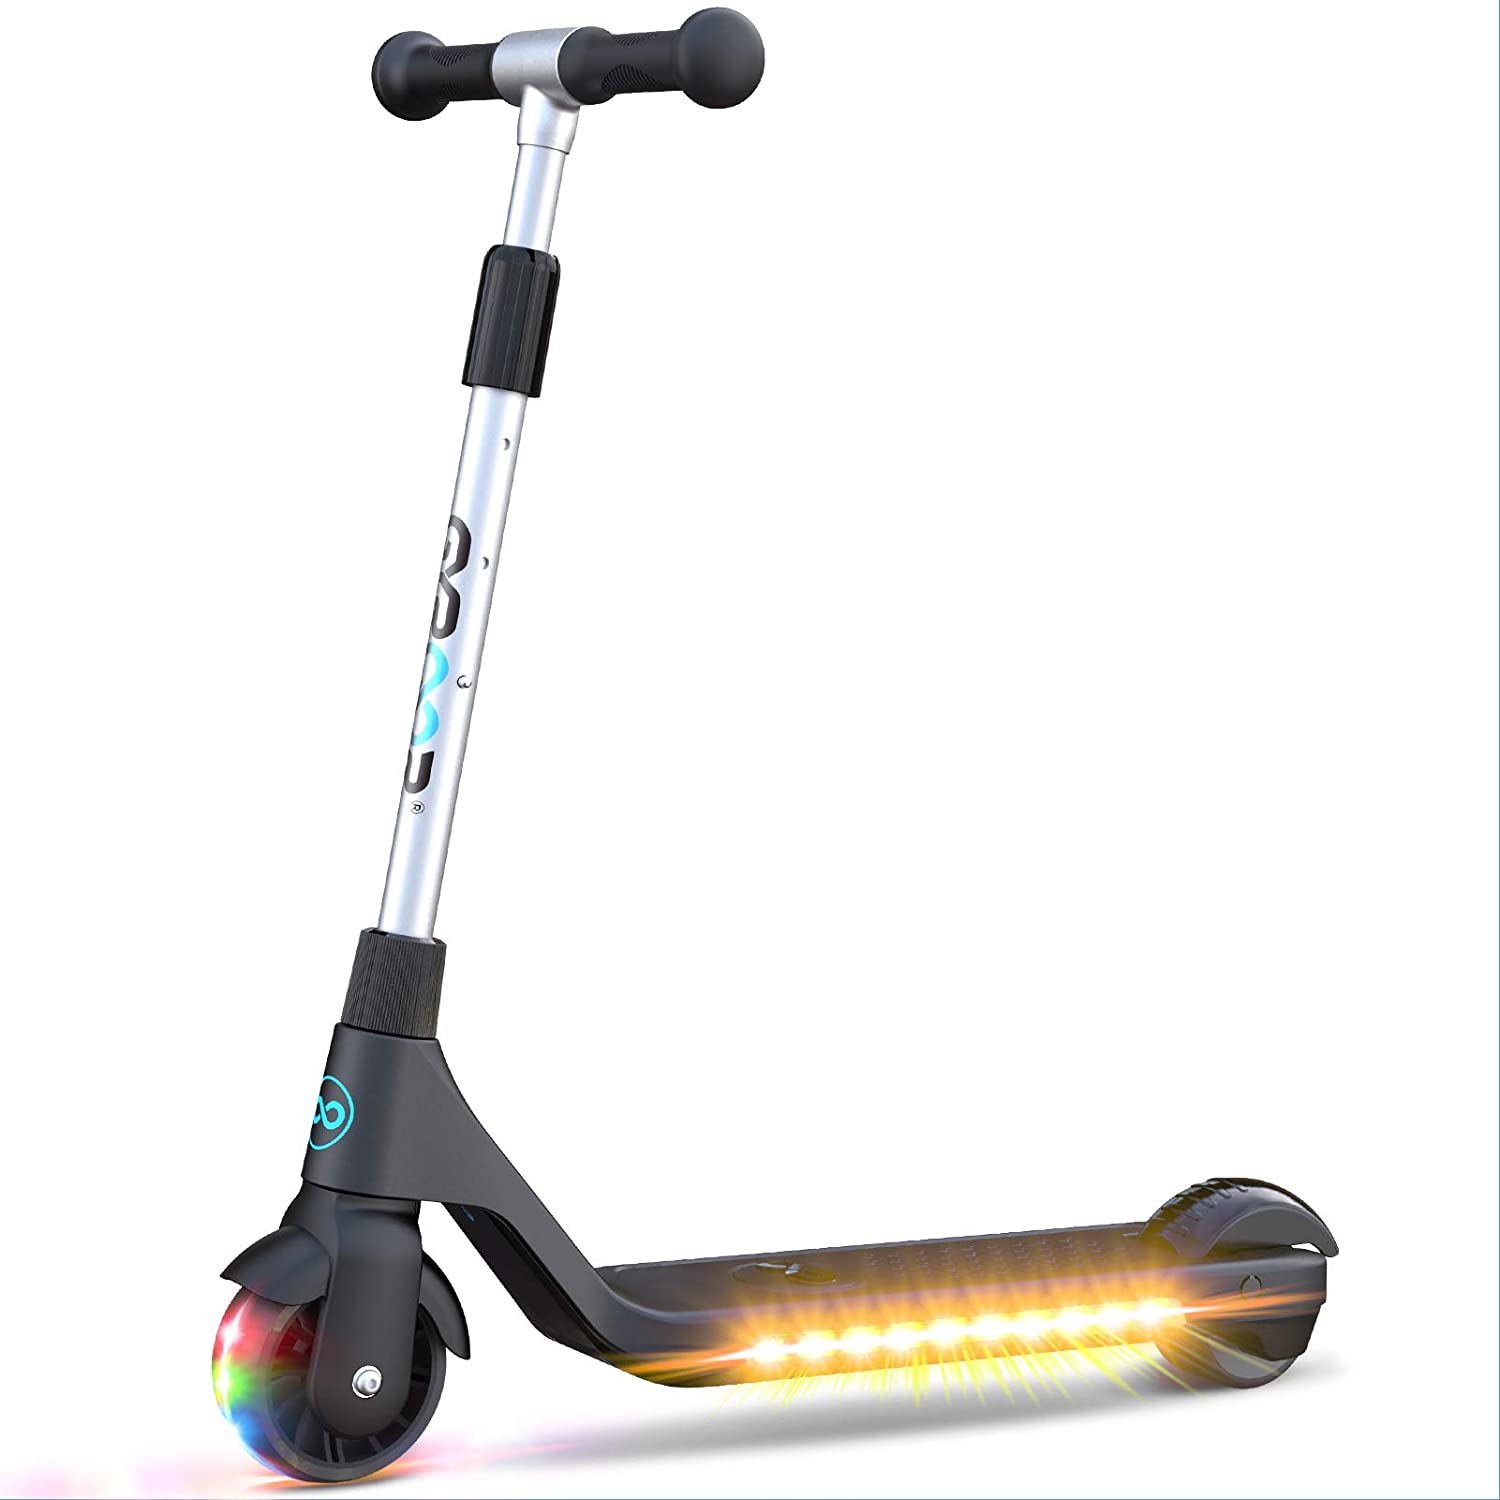 GYROOR Electric Scooter for Kids, Teens, Boys and Girls with Lightweight and Adjustable Handlebar, H30 Kids Electric Scooter with Rechargeable Battery, 6 MPH Limit-Best Gift for Kids! - image 1 of 10